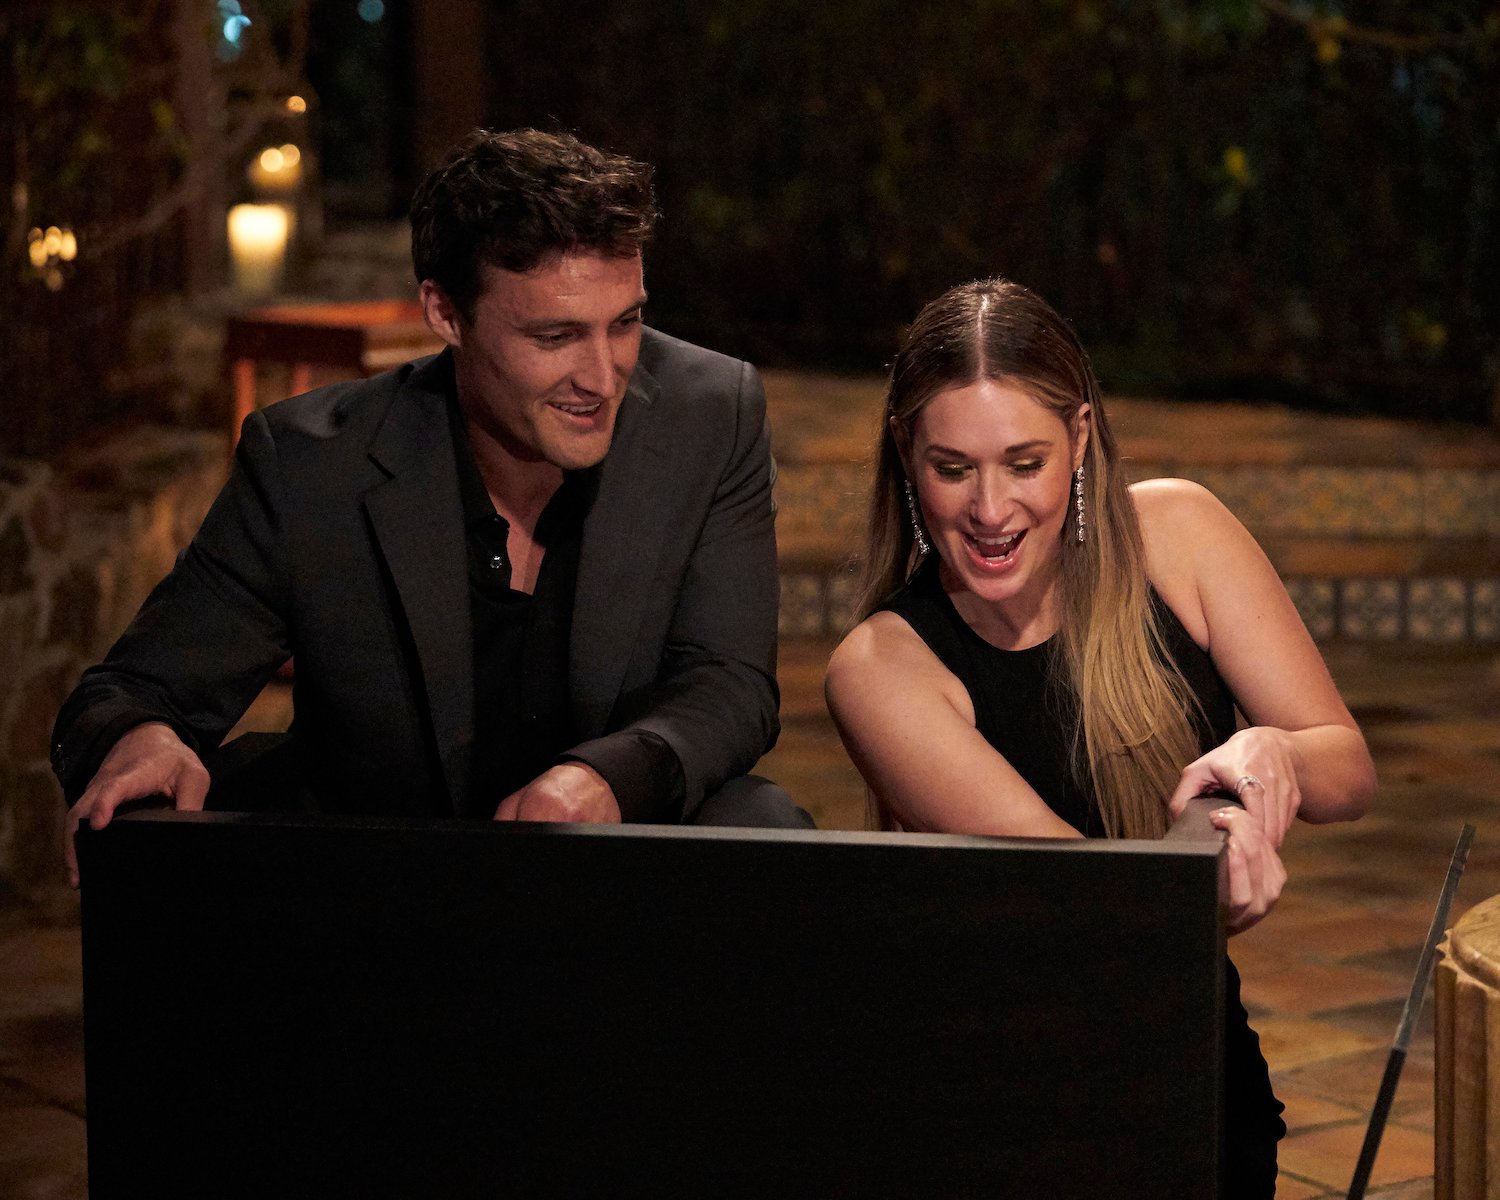 Tino Franco and Rachel Recchia laughing together in 'The Bachelorette' Season 19